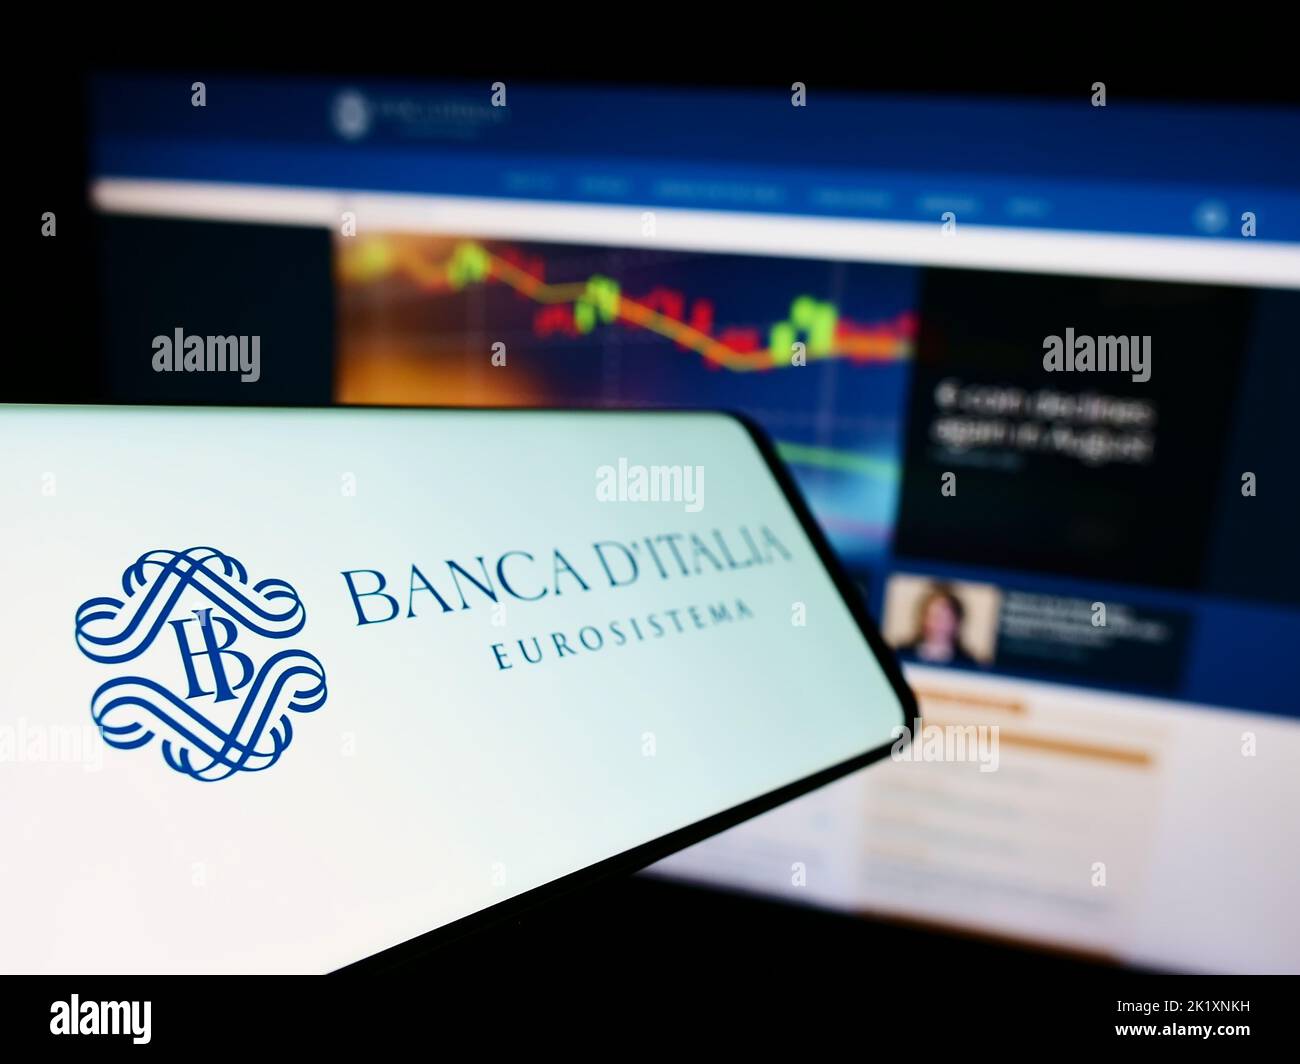 Mobile phone with logo of Italian central bank Banca d'Italia on screen in front of website. Focus on left of phone display. Stock Photo